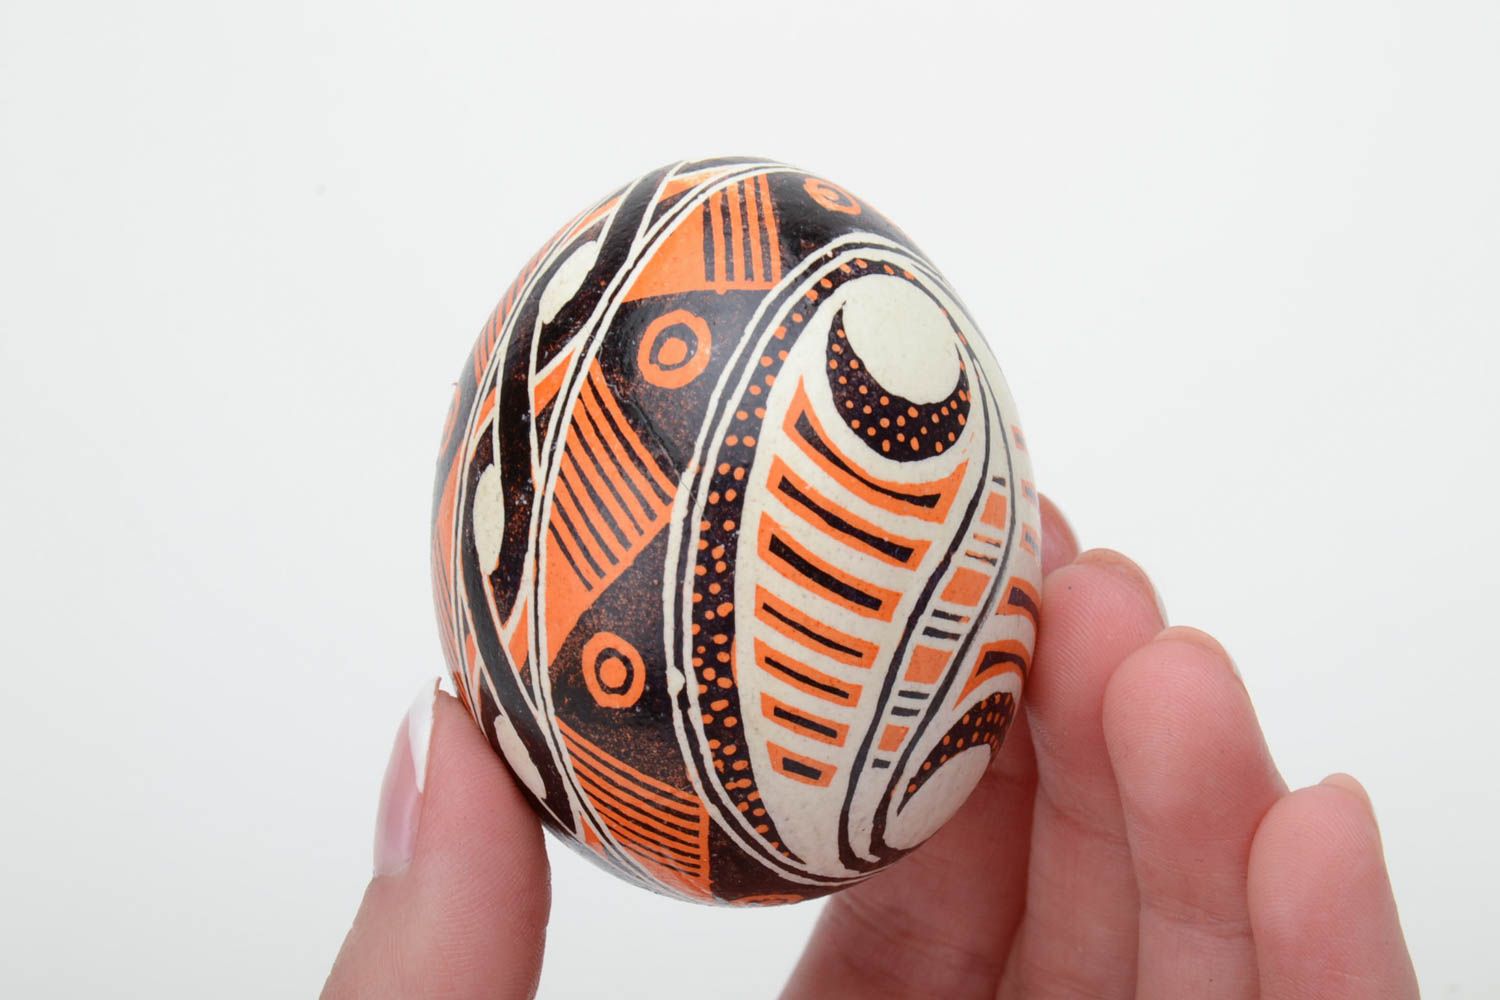 Handmade designer pysanka decorative Easter egg painted with wax and aniline dyes photo 5